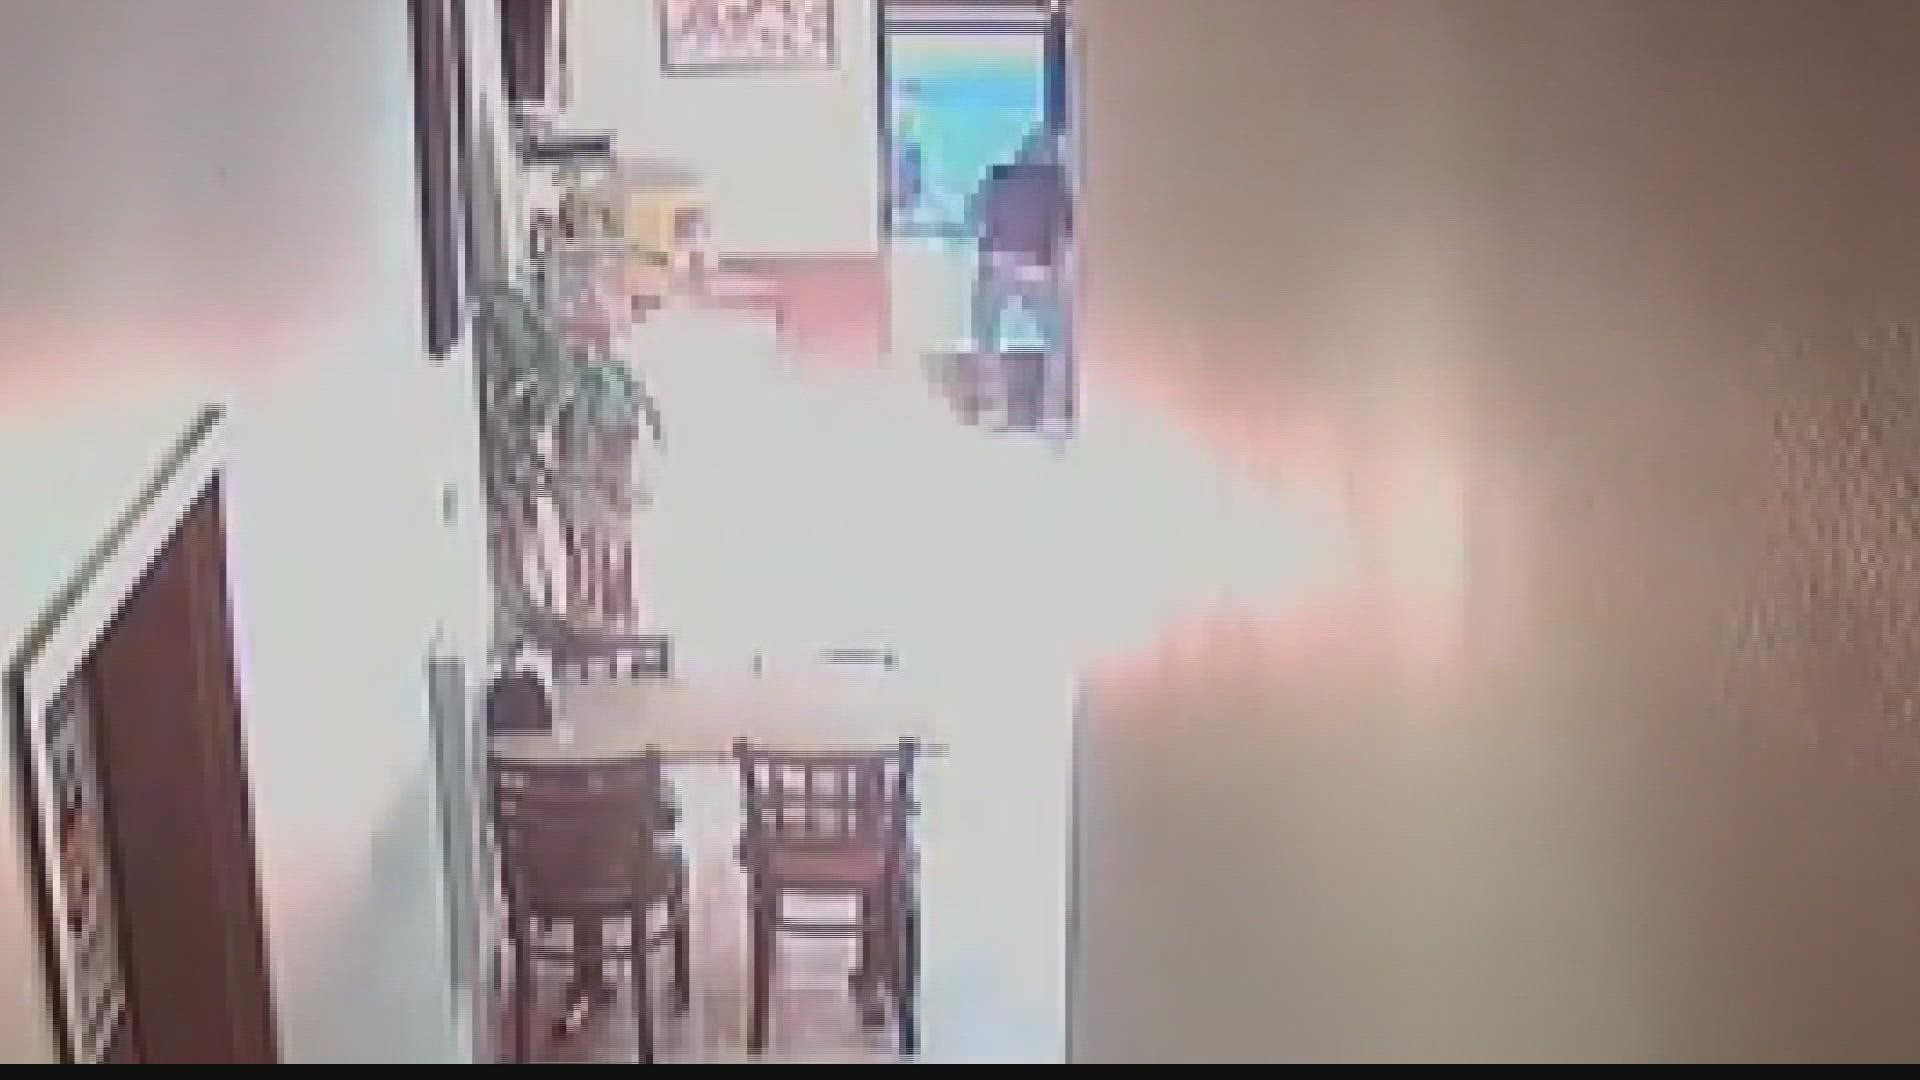 A man was caught on camera pouring gasoline inside a west Phoenix restaurant before setting it on fire and fleeing. Now police want your help to find him.